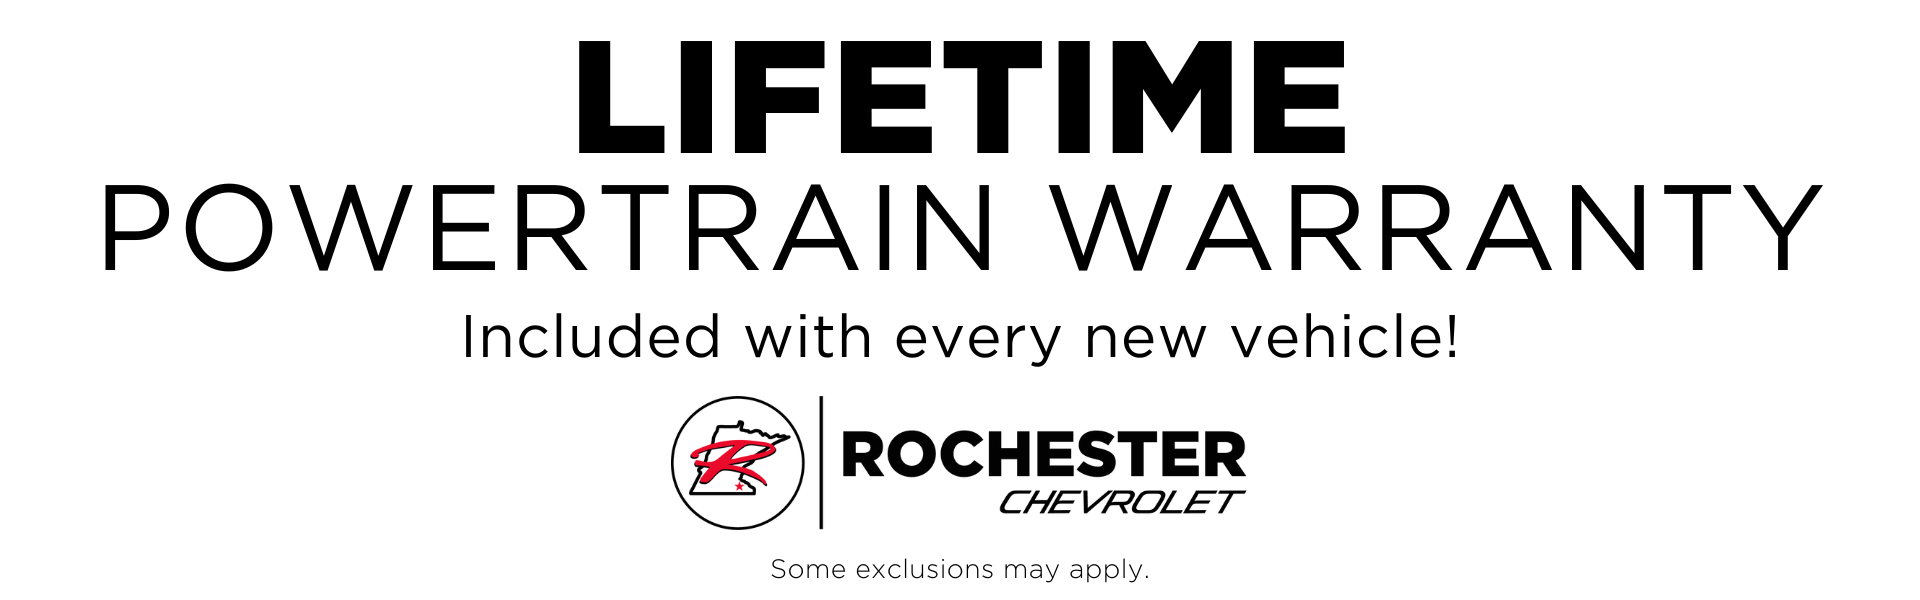 Lifetime Powertrain Warranty included with every new vehicle at Rochester Chevrolet